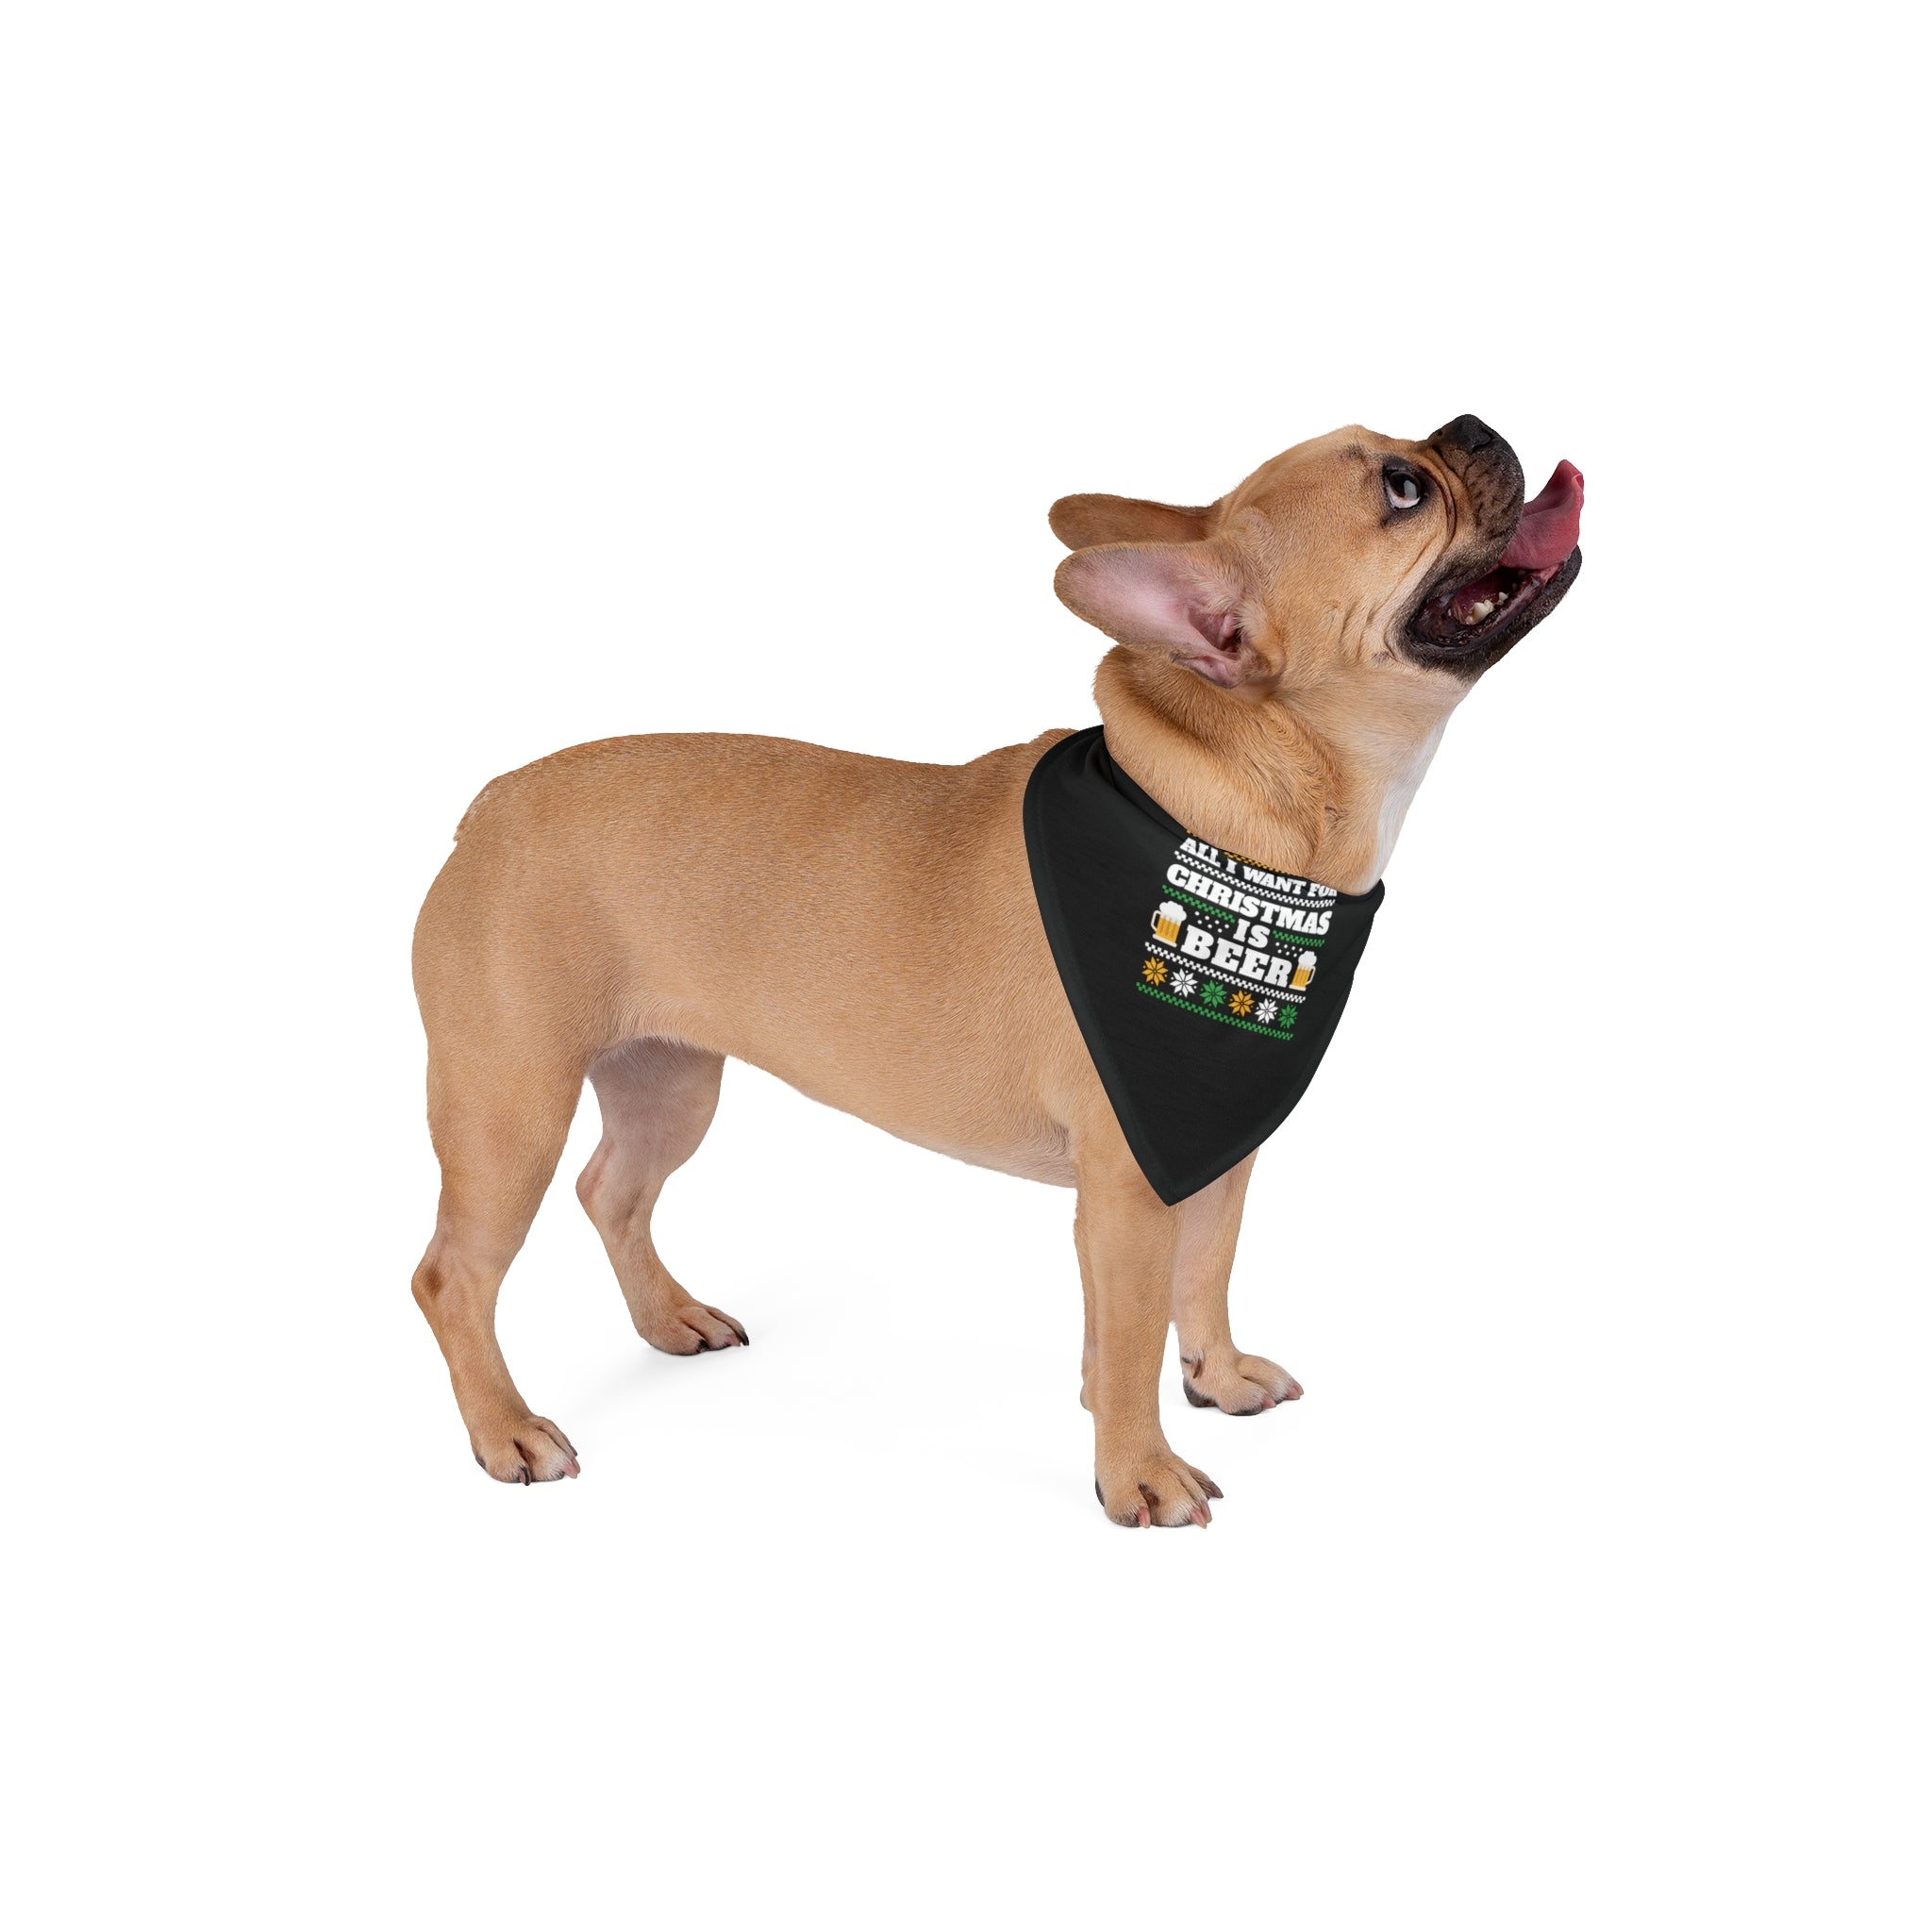 A brown French bulldog sports a black Beer Ugly Sweater - Pet Bandana that reads "Dear Santa, I was framed." The soft-spun polyester accessory adds charm as the dog looks upwards, mouth open and tongue out against a plain white background.